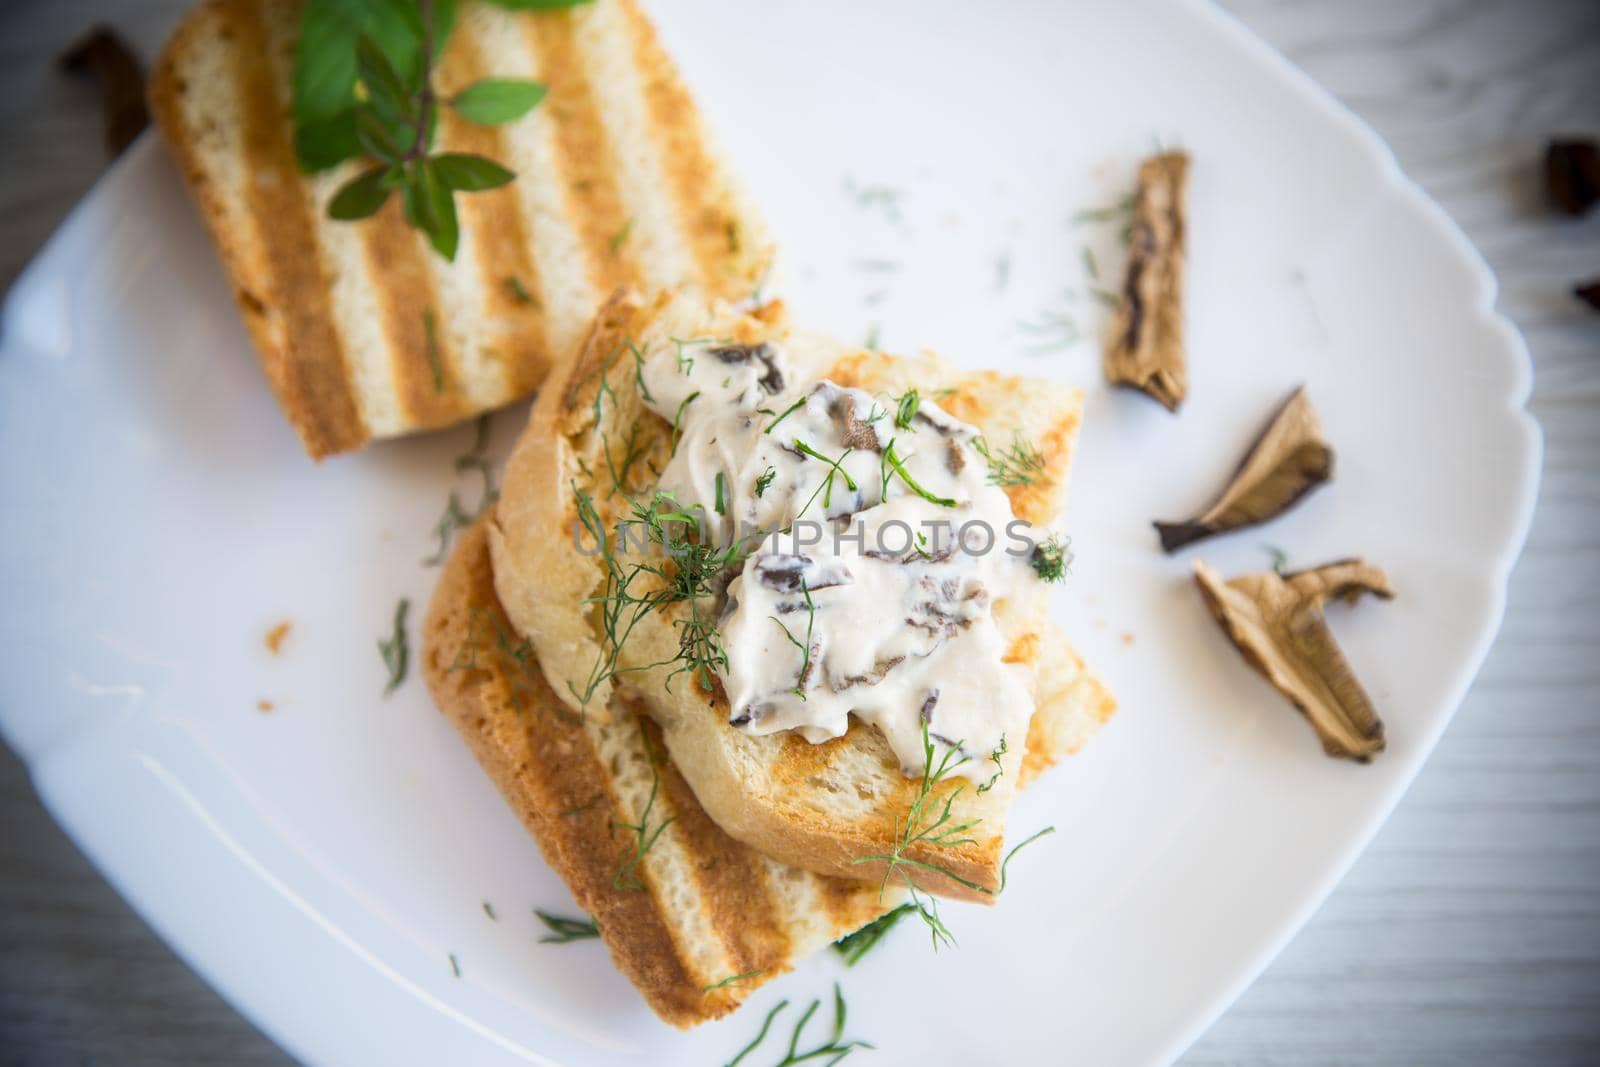 fried bread toast with cheese spread with boiled dried mushrooms, in a plate on a wooden table.